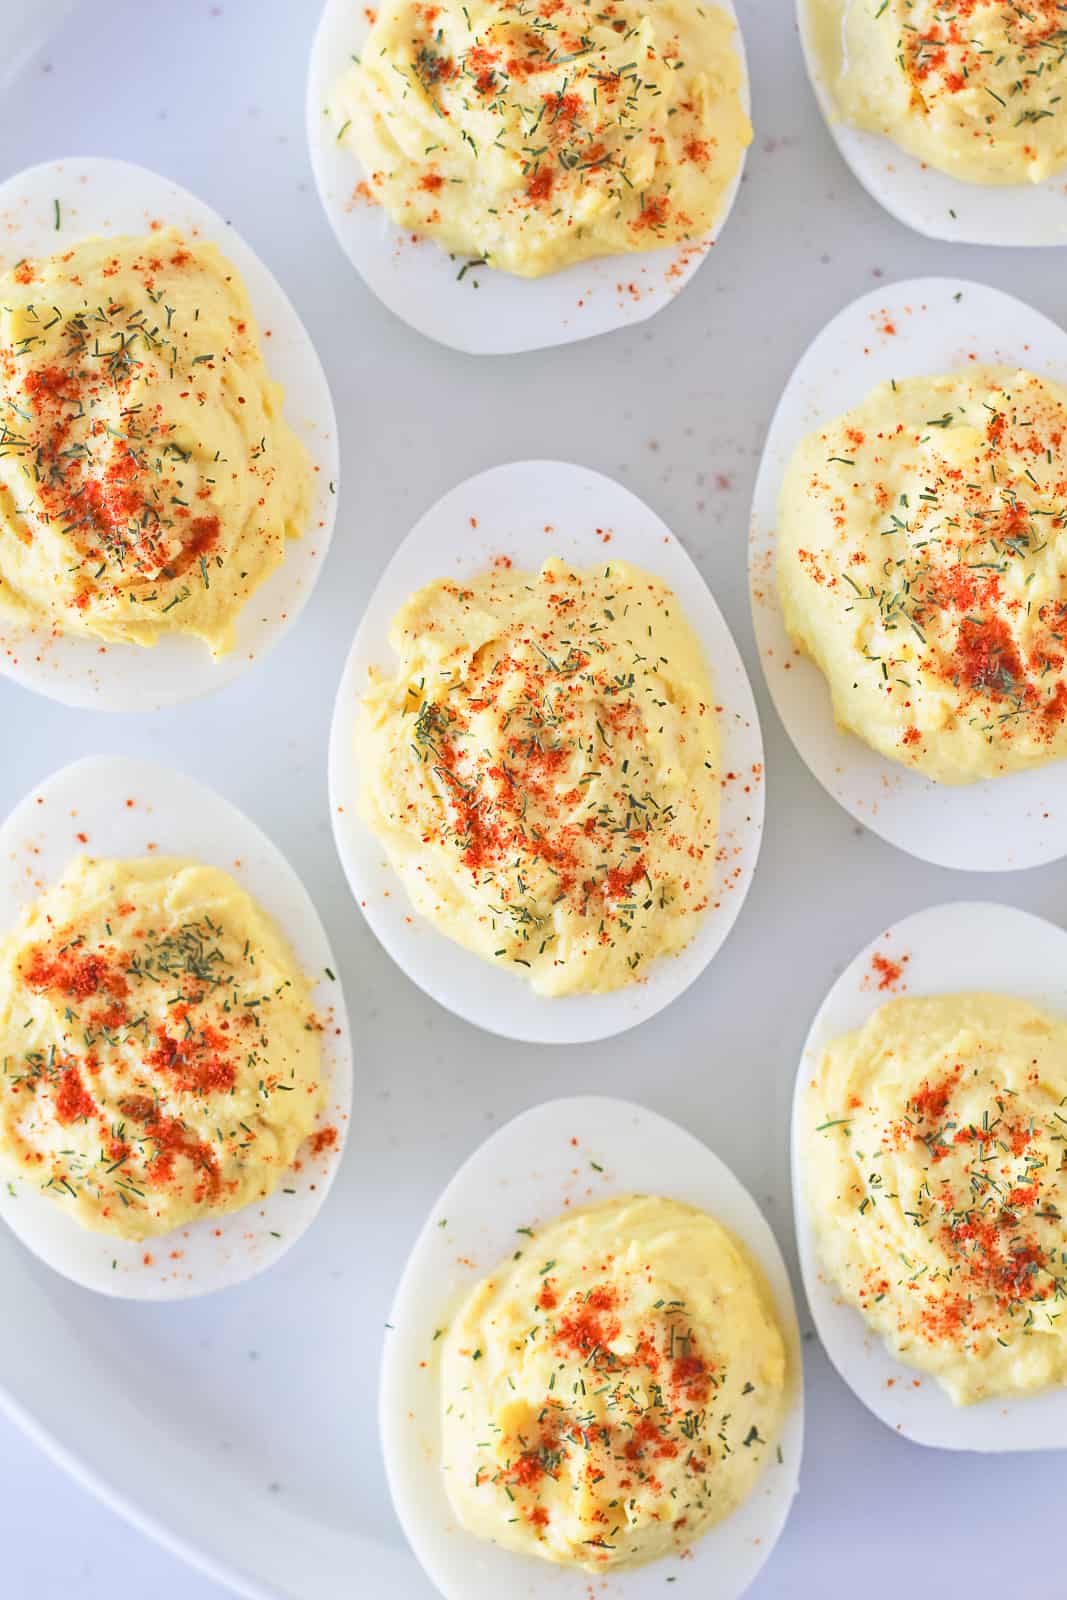 Keto Deviled Eggs sprinkled with dried dill and smoked paprika.